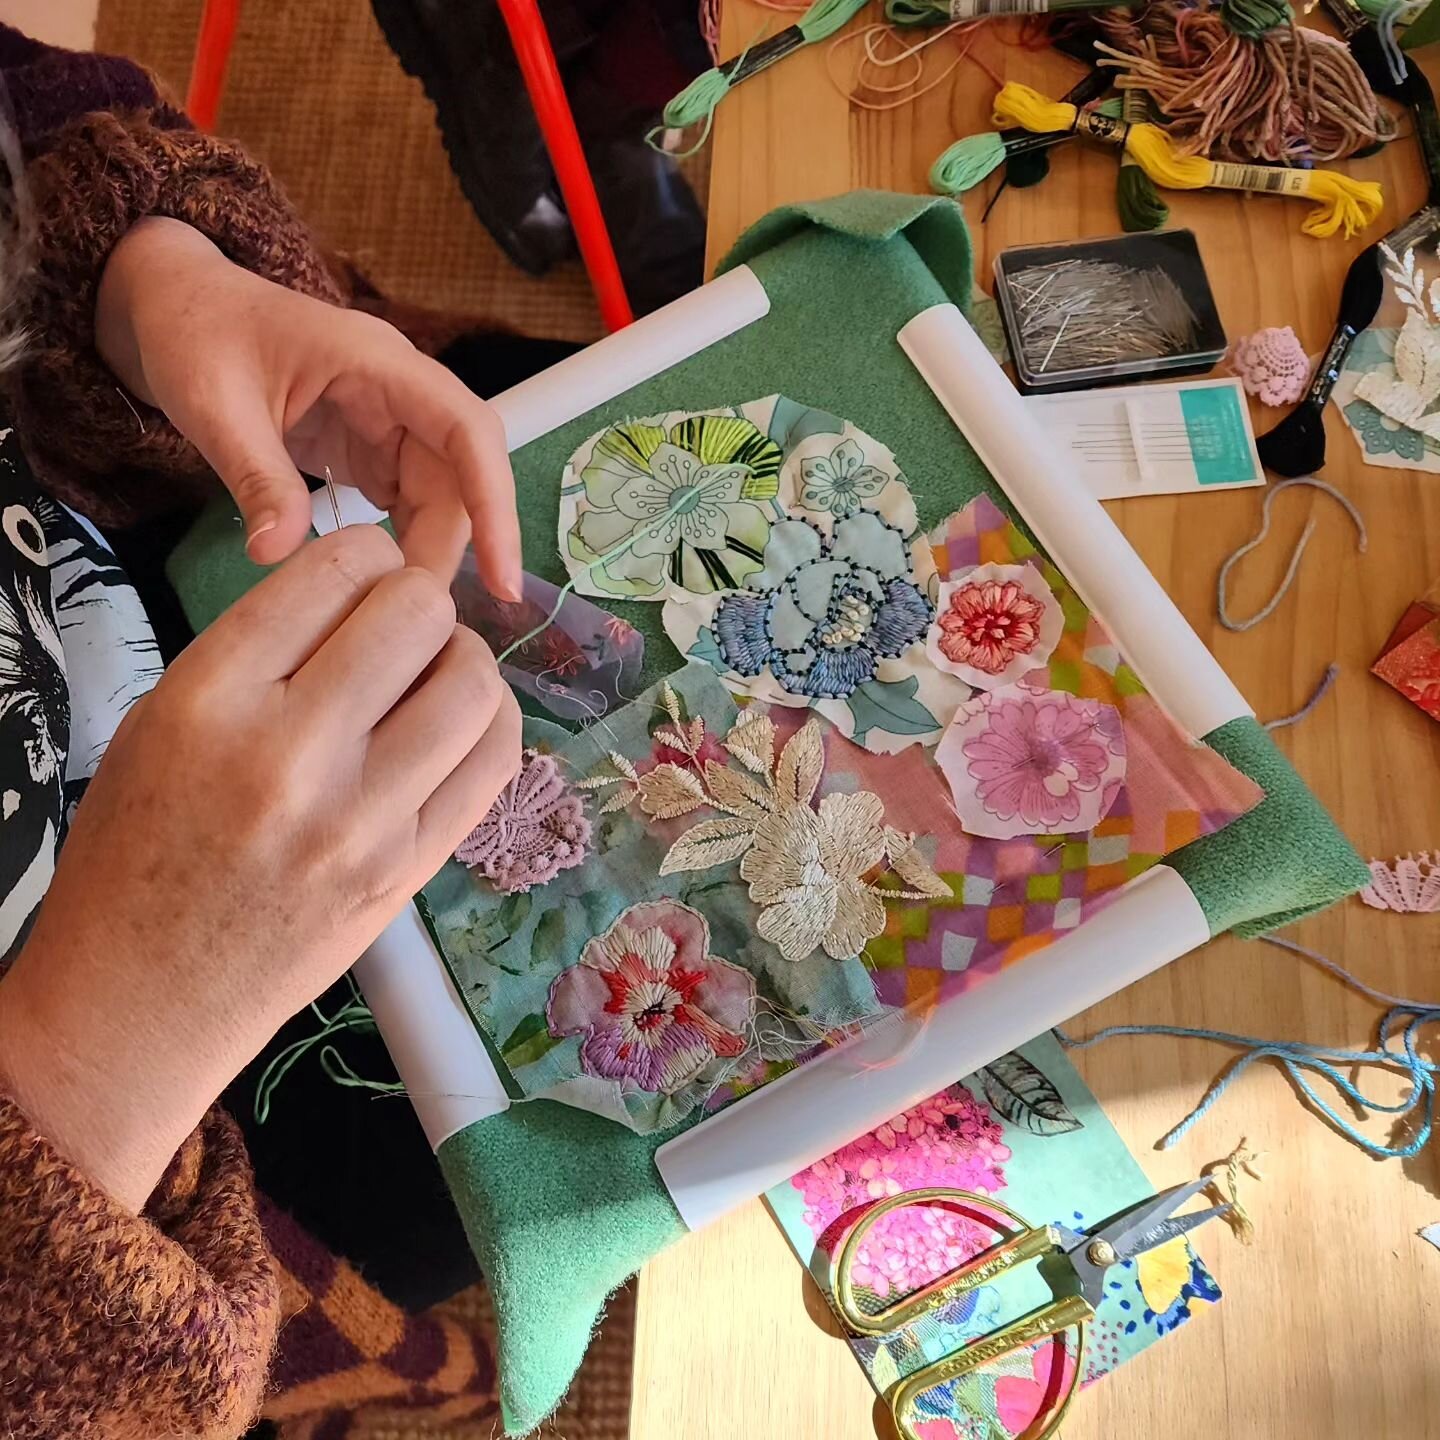 Magic in progress...15 talented, interesting, kind and fun women creating together. Lots of focus yesterday bringing elements of their textile collages together with stitch. So lovely to be working in @madeleine_stamer art studio with inspiration on 